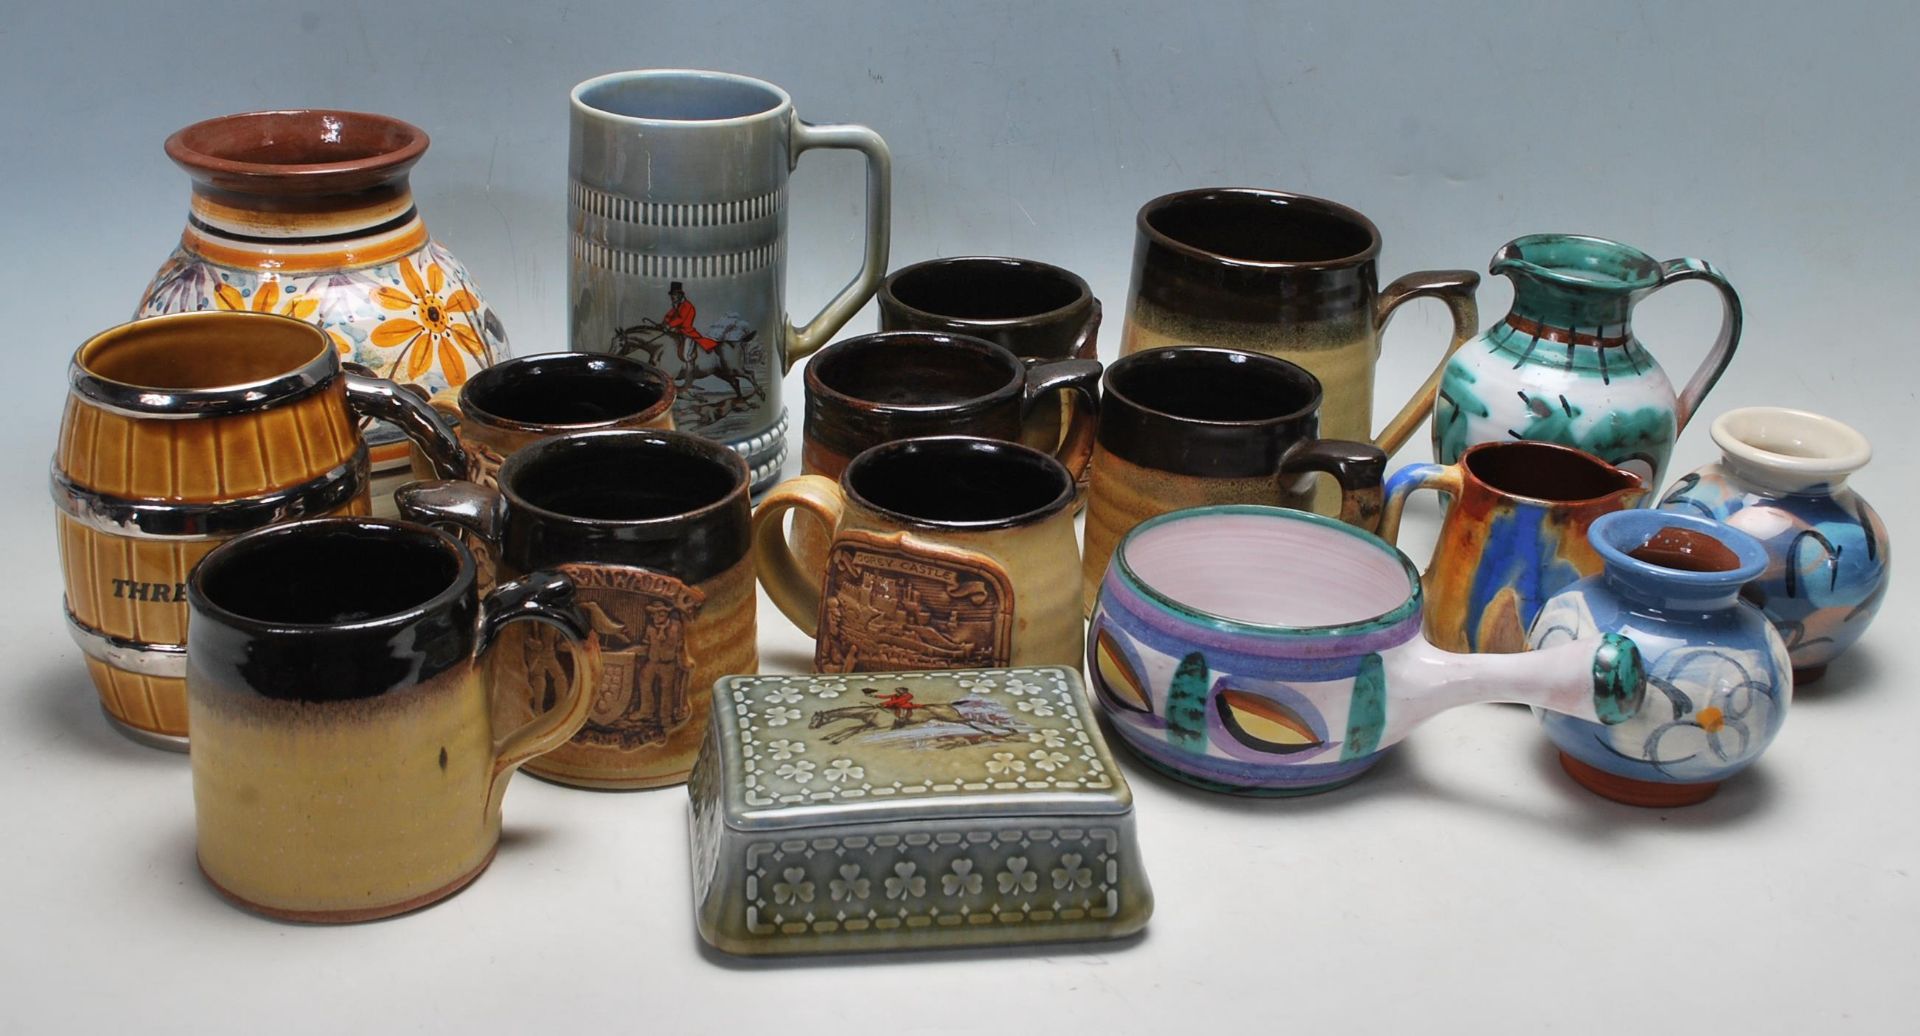 COLLECTION OF VINTAGE 20TH CENTURY STUDIO ART POTTERY WARE